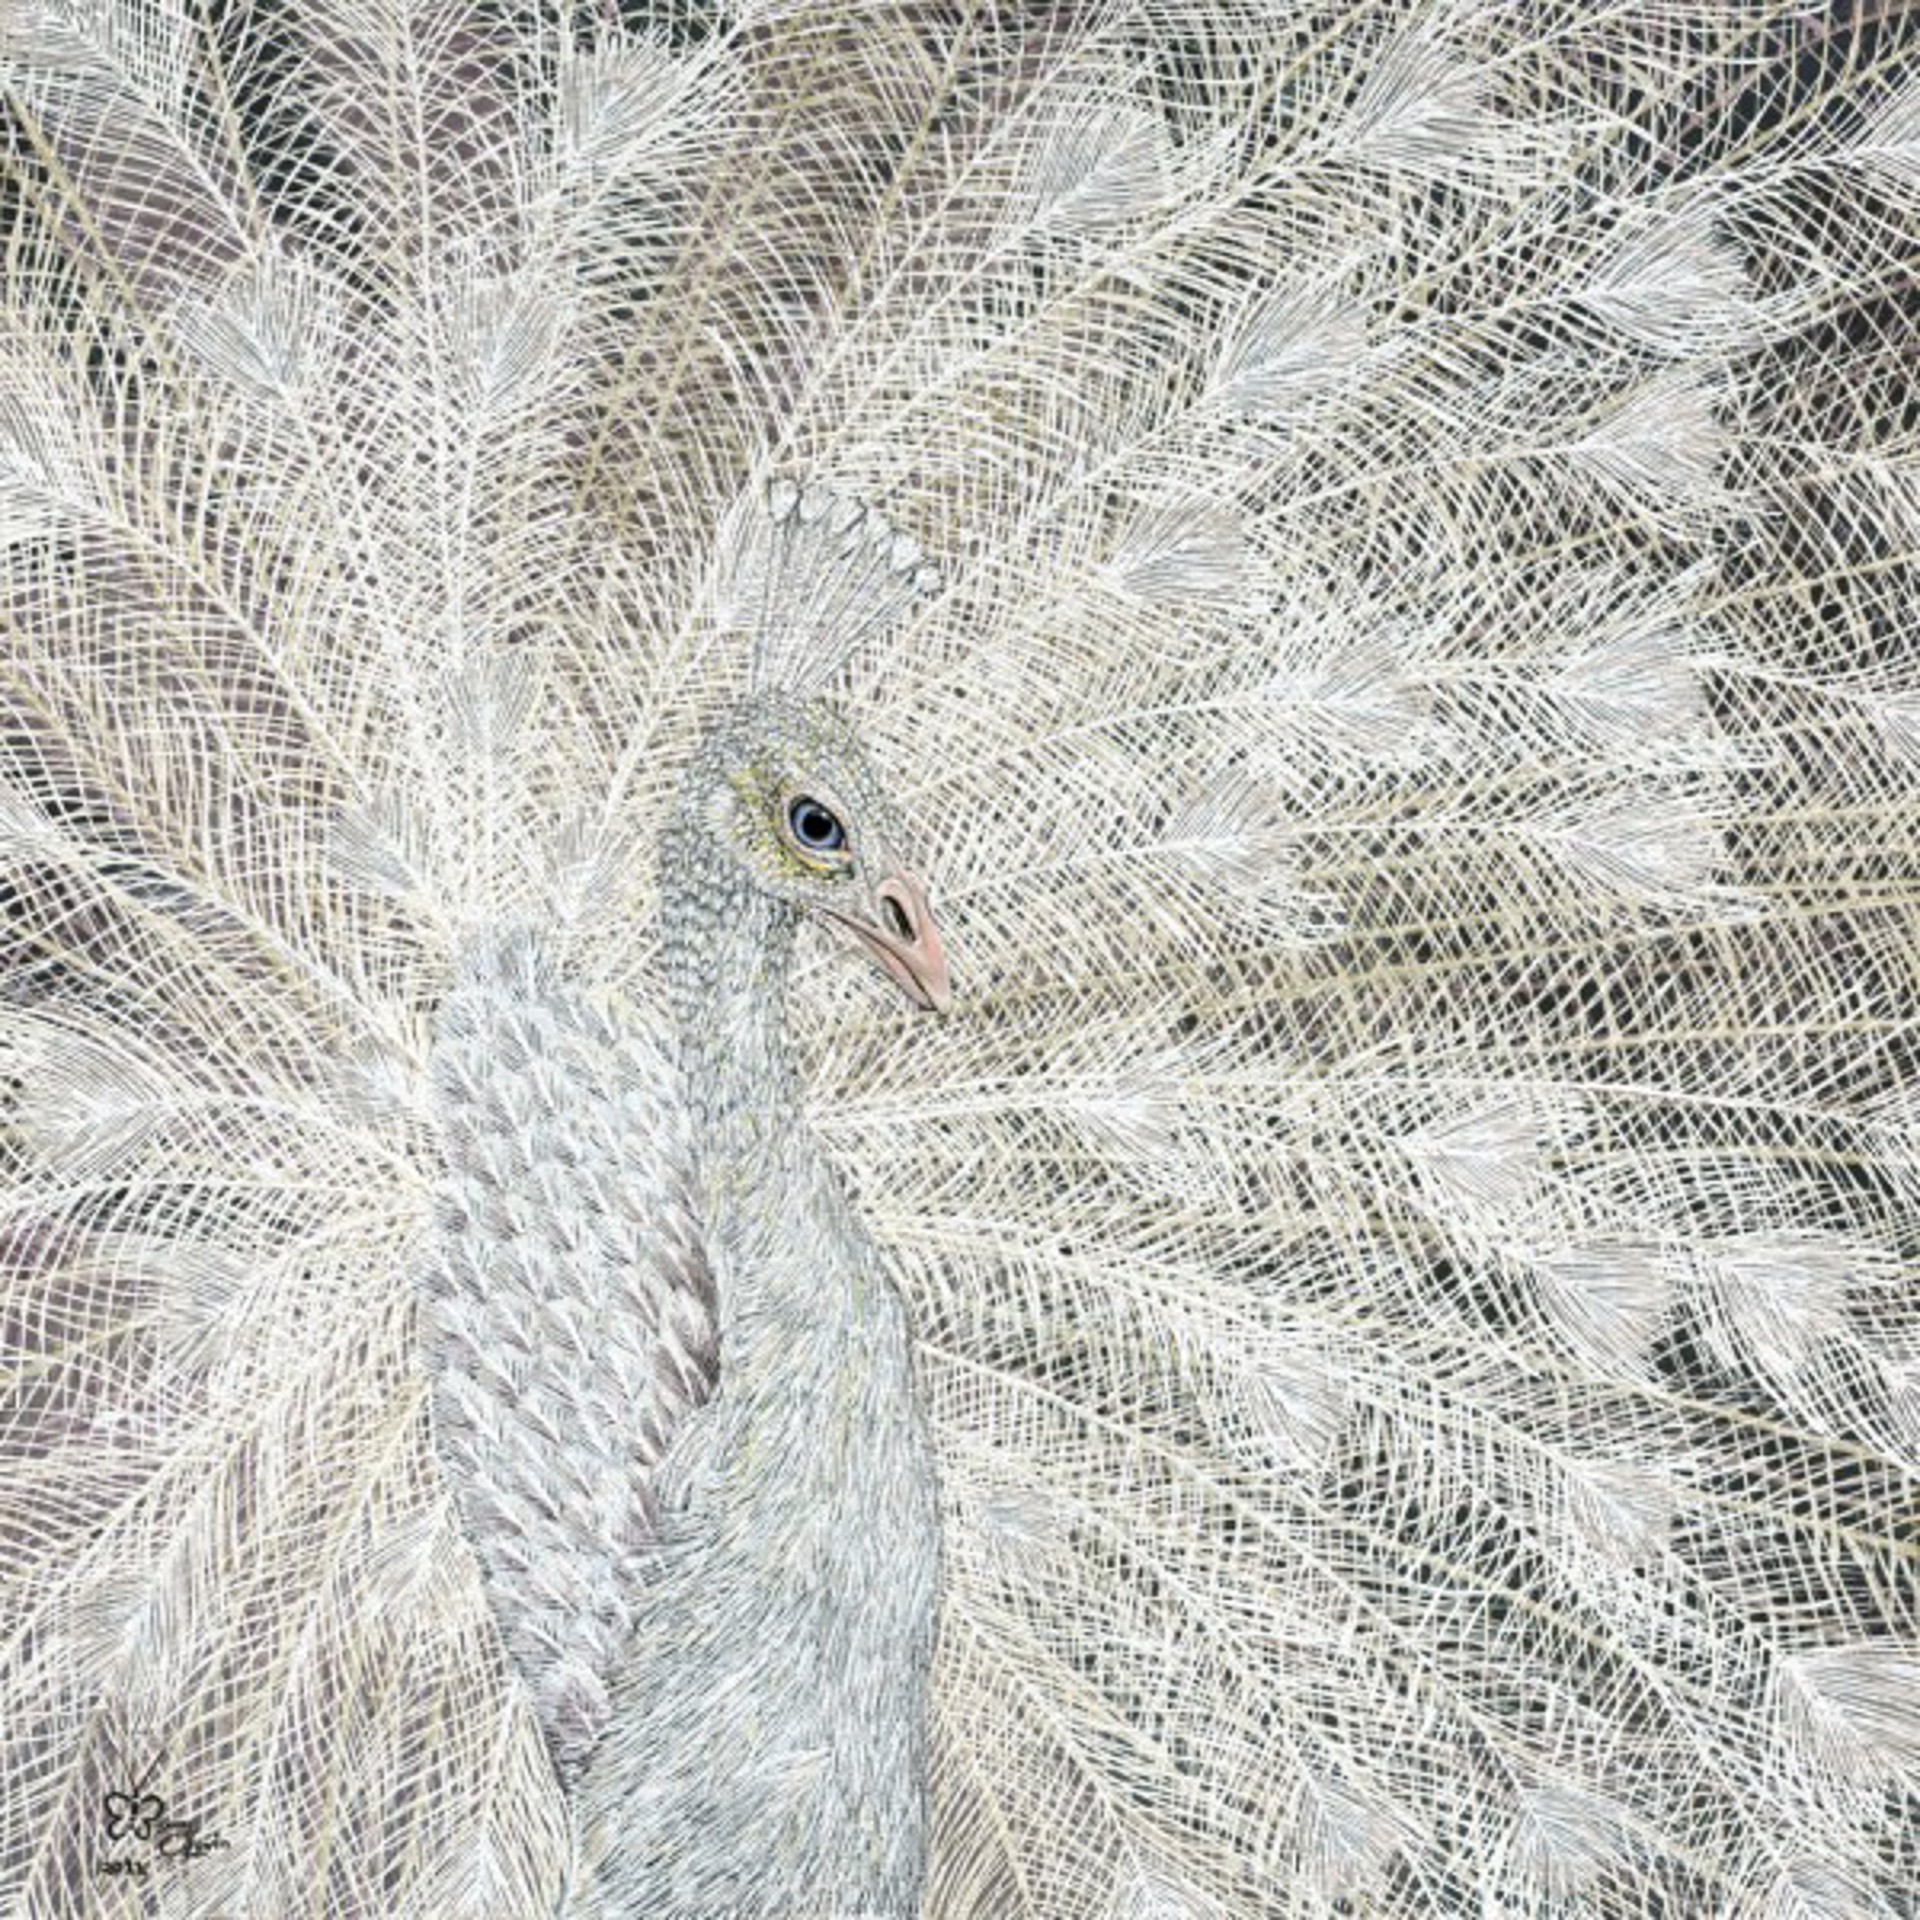 I am a White Peacock by Barry Levin